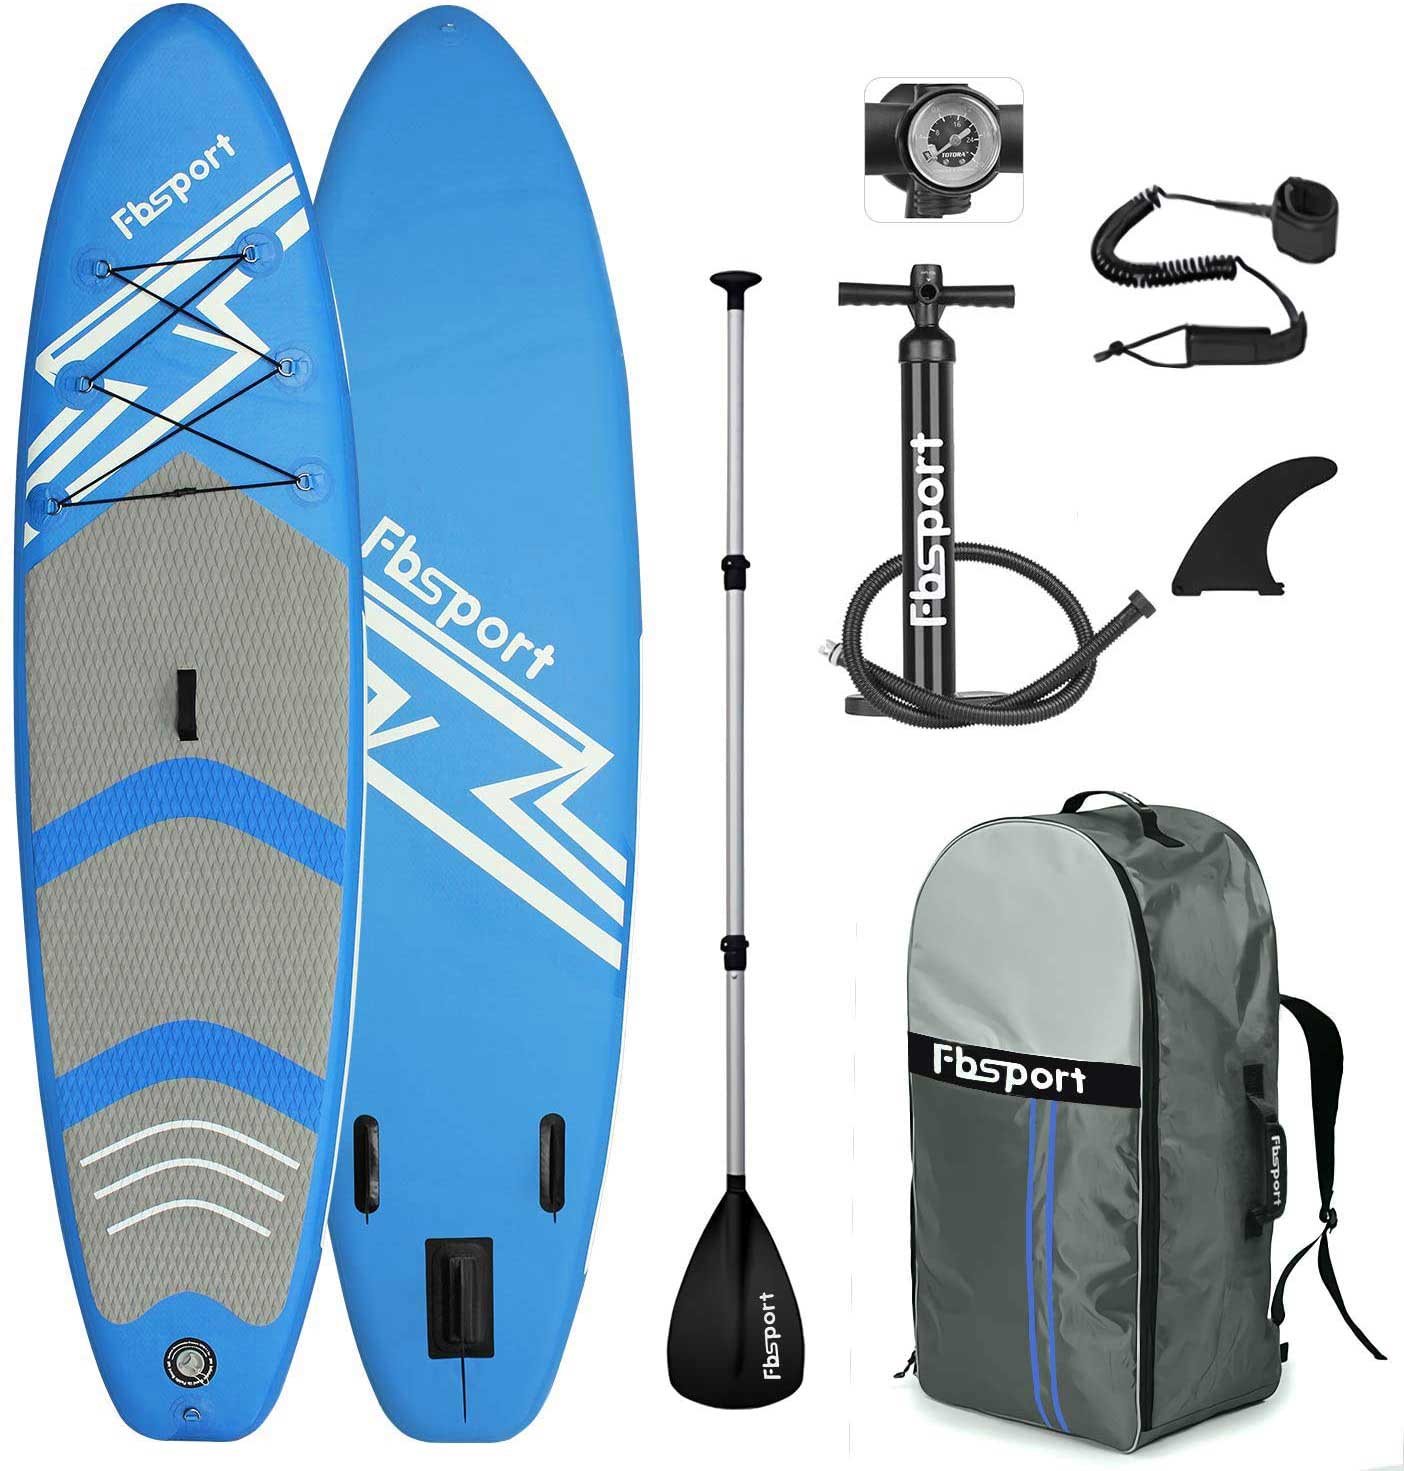 FBSPORT-Premium-Inflatable-Stand-Up-Paddle-Board